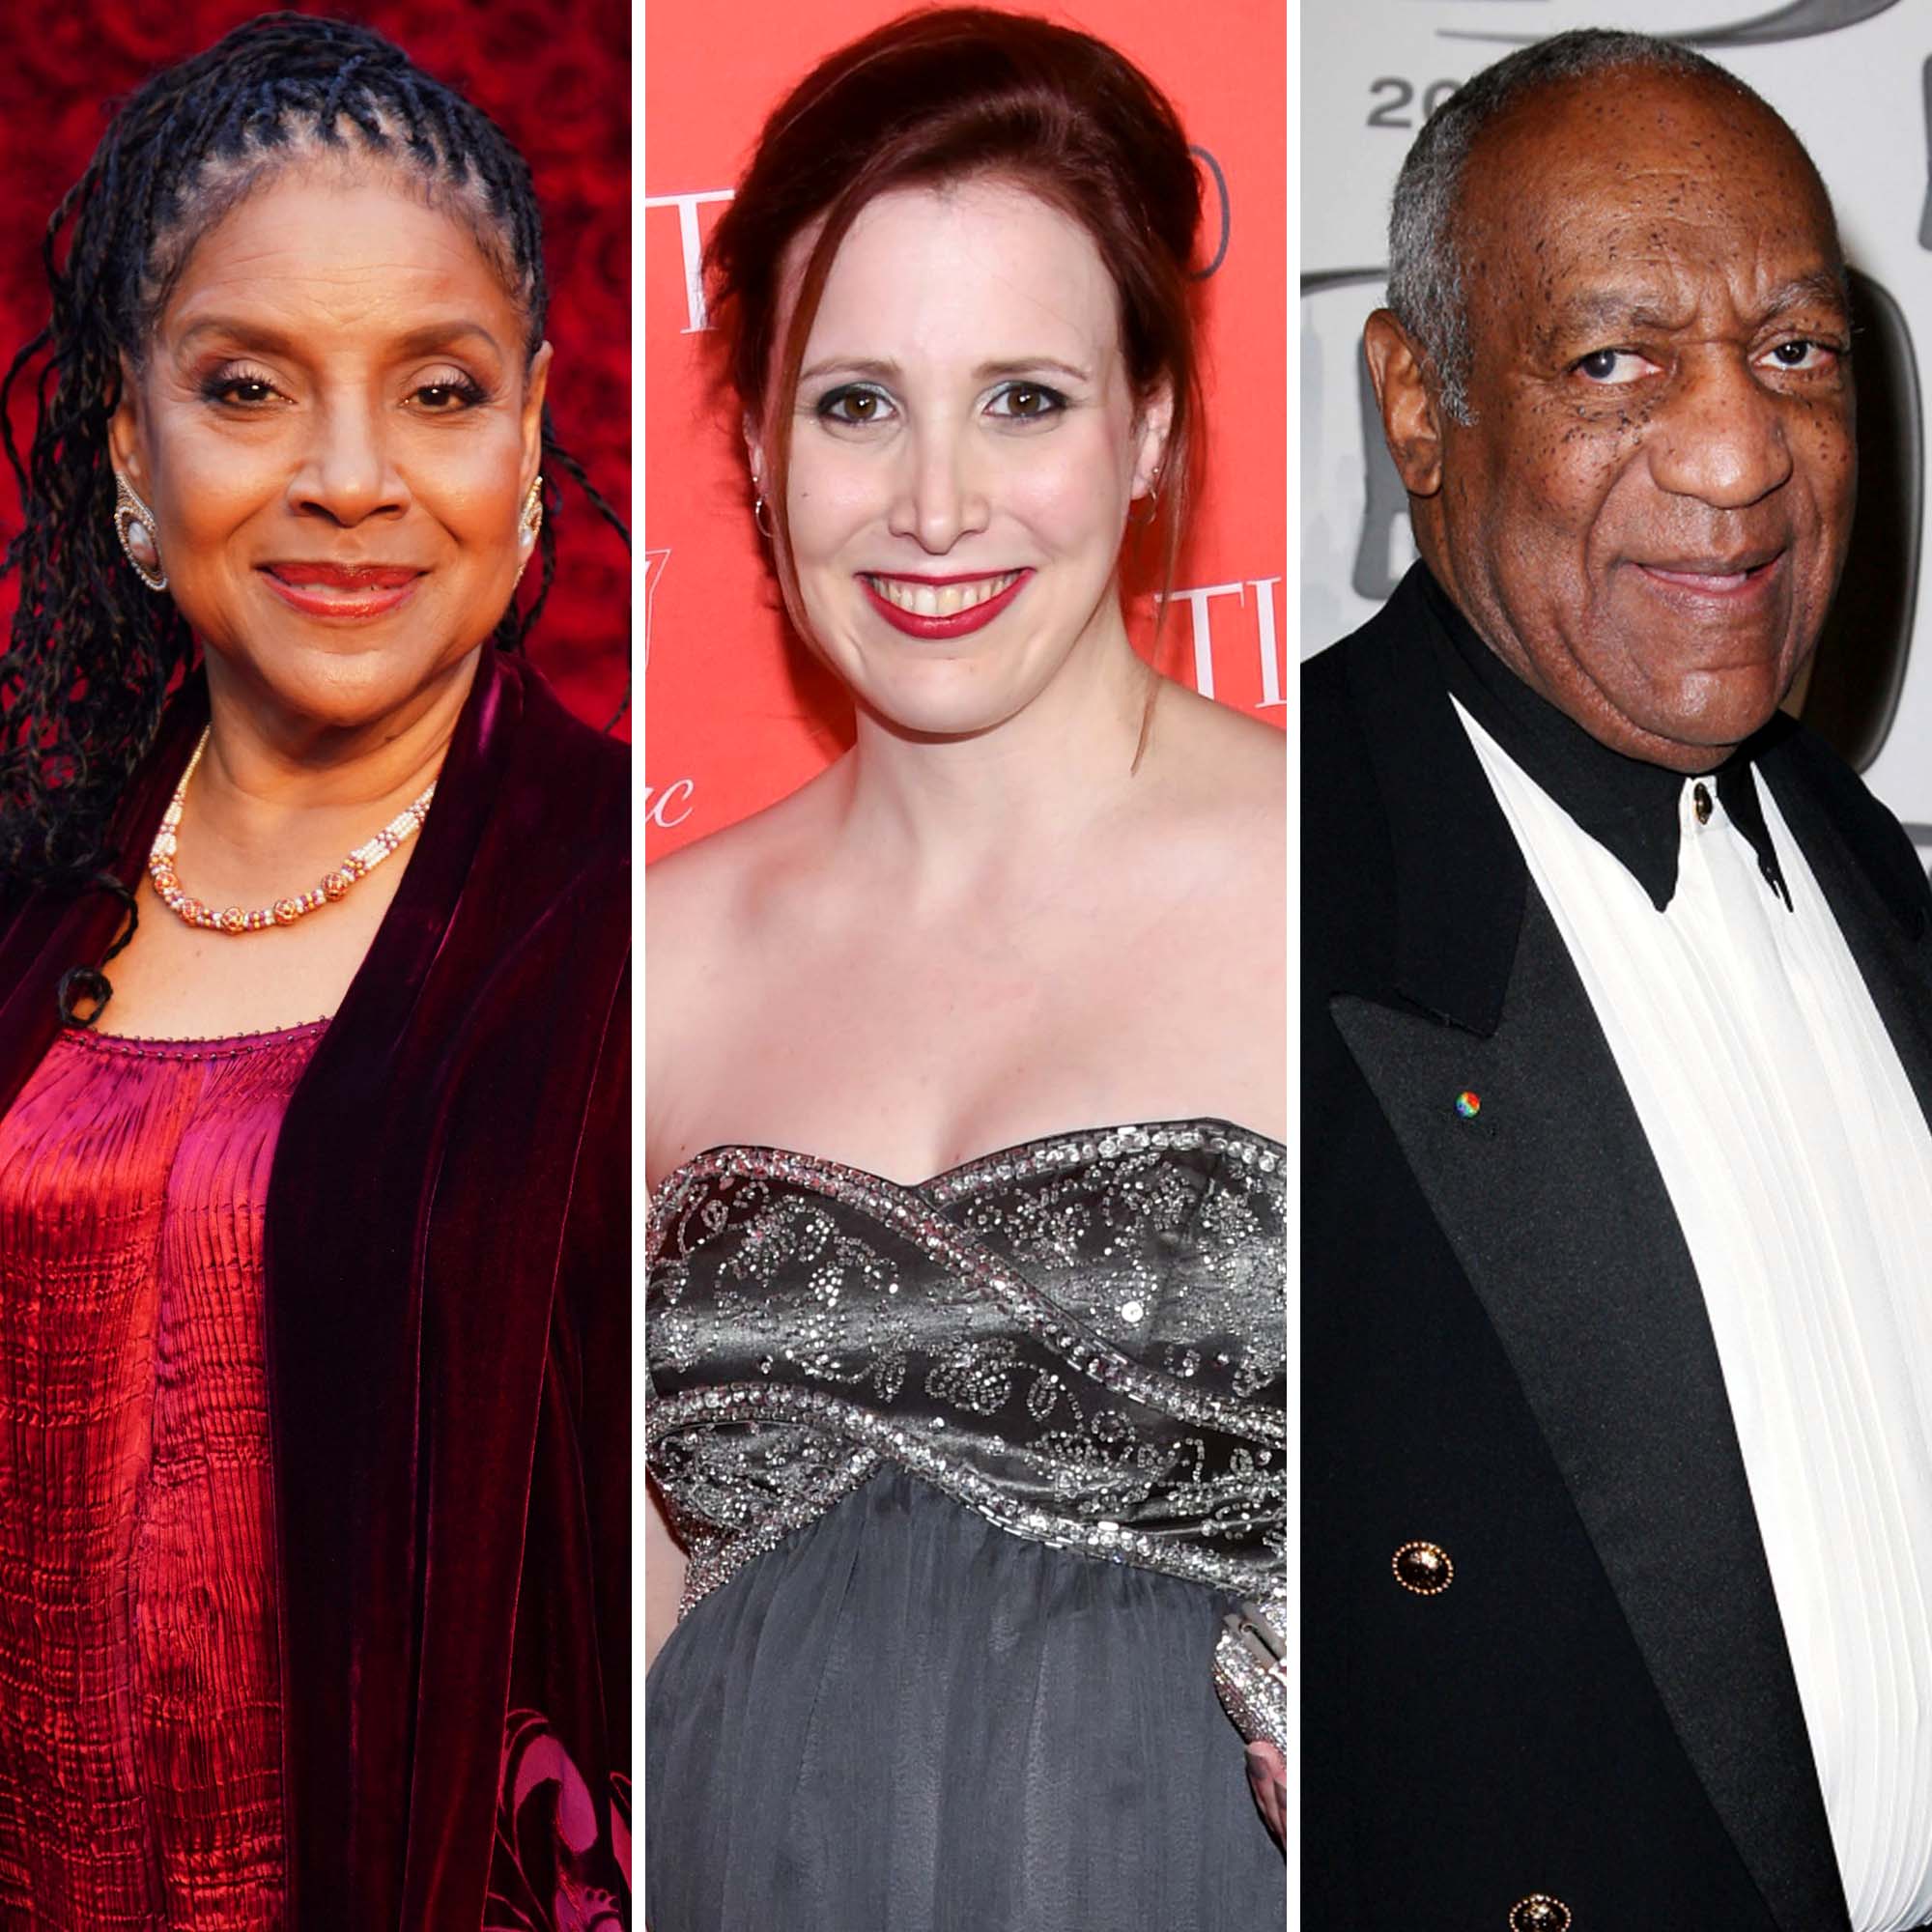 Bill Cosby Daughter - Phylicia Rashad Raises Eyebrows With Response to Bill Cosby's Release